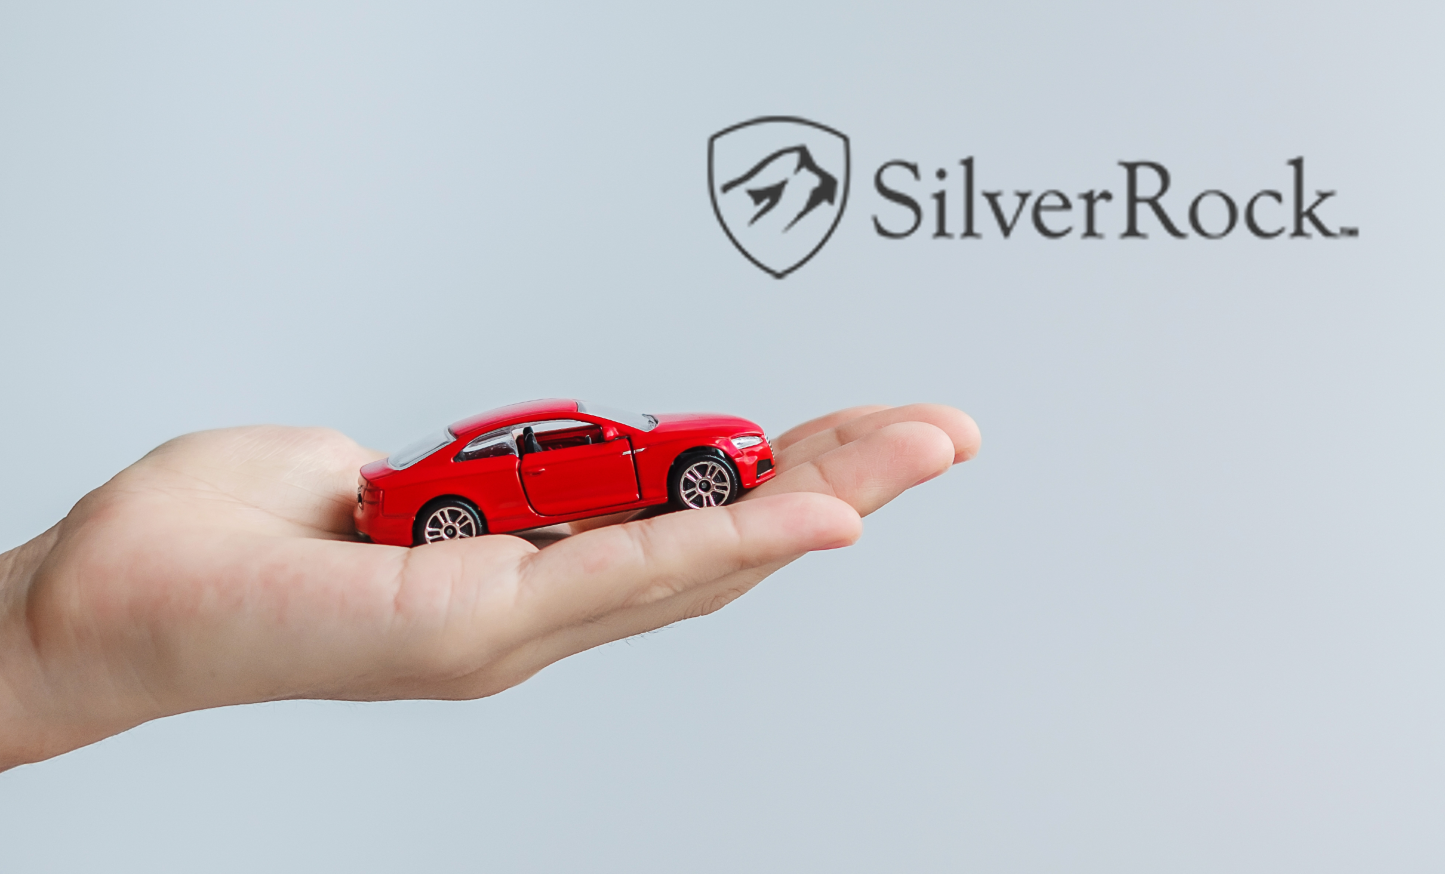 SilverRock Review: Benefits, Process, and Plans!